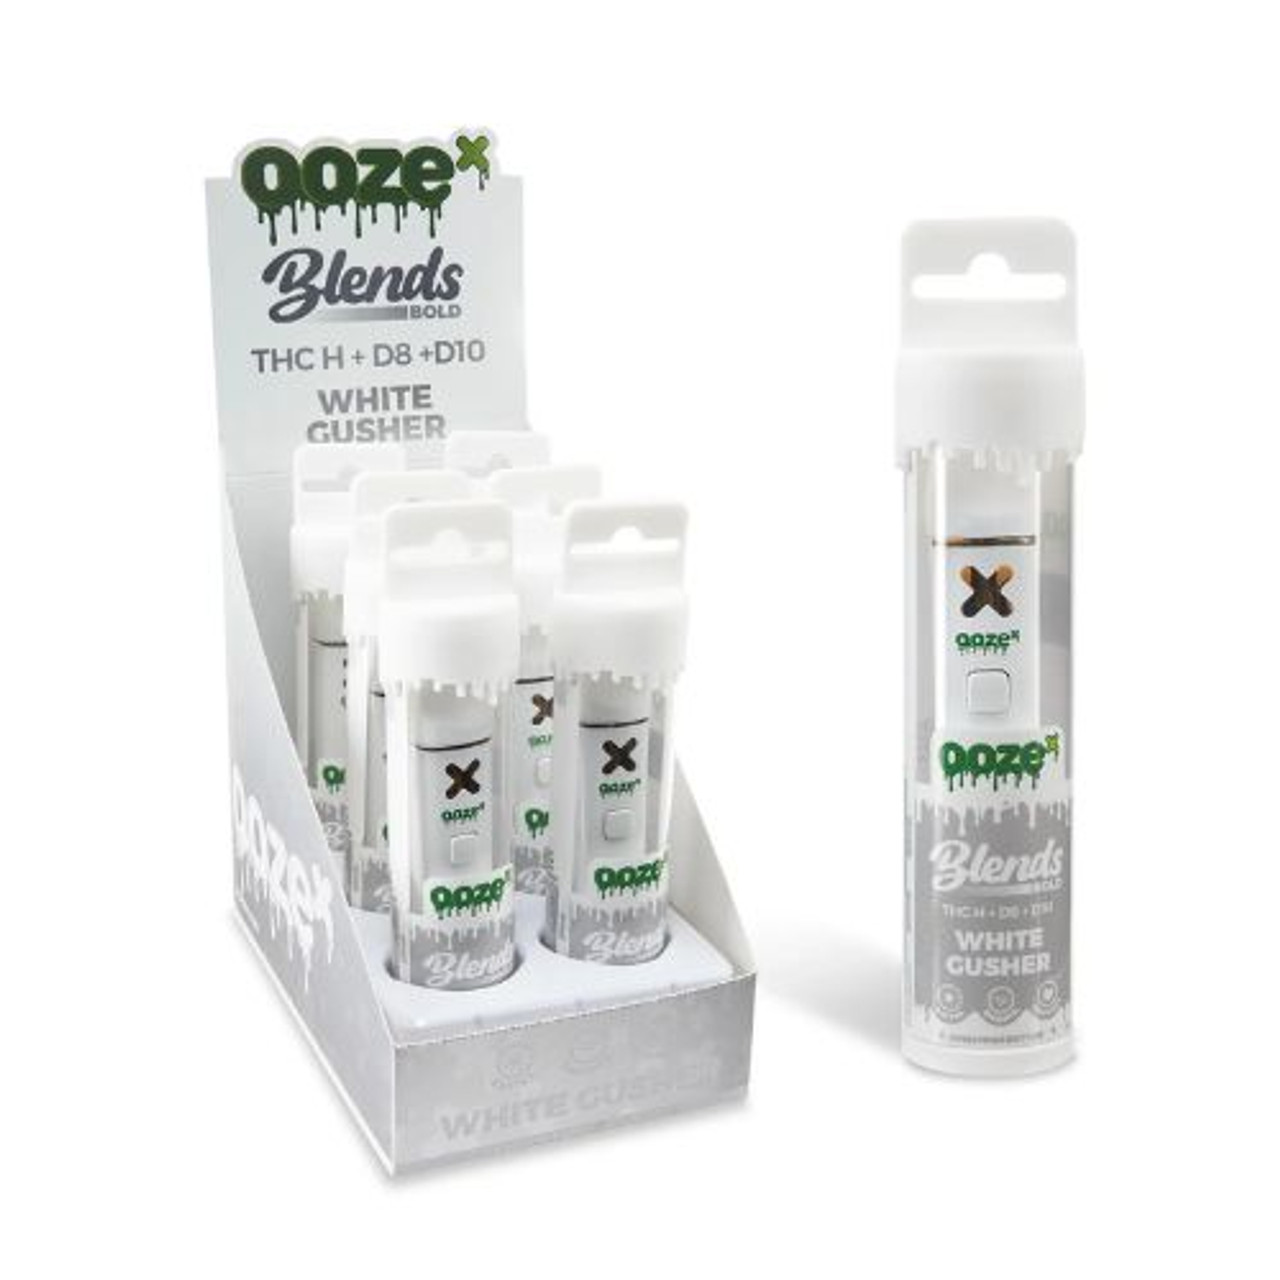 OozeX 2ml Disposable Delta Blends - White Gushers - 6 ct. Display